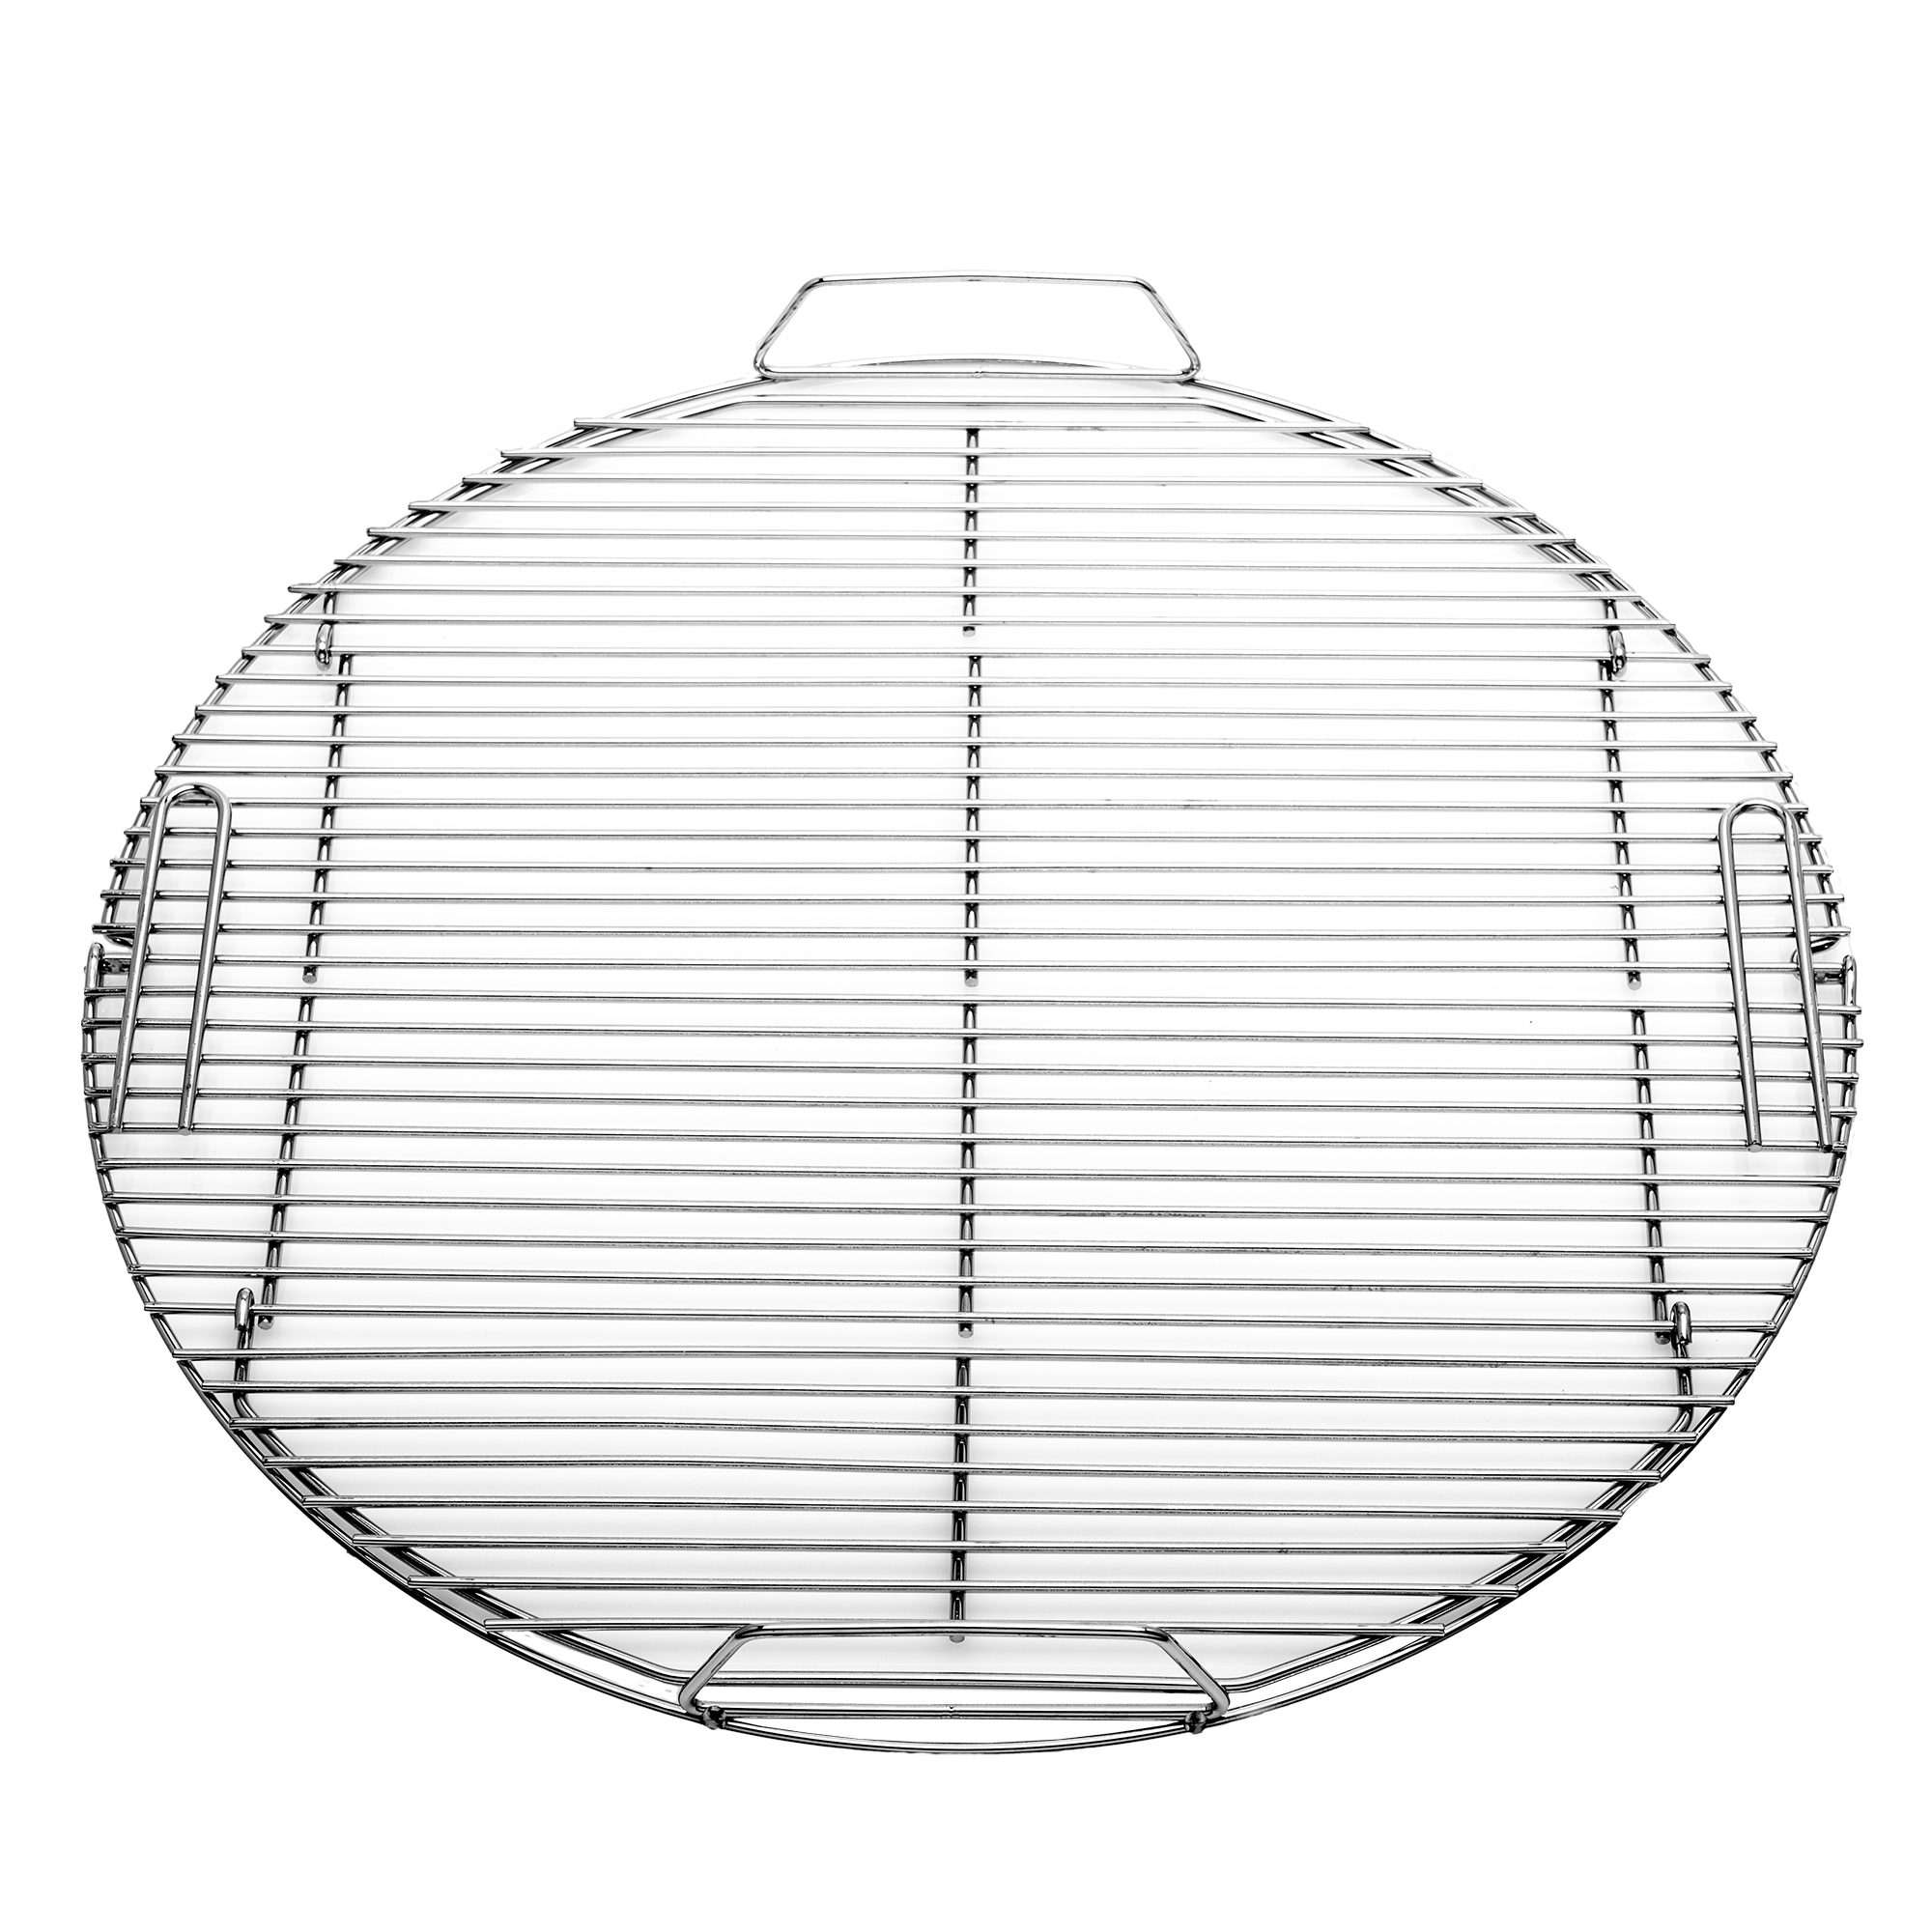 Grilling Grate No 1 F60/AIR F60 stainless steel 24 in.